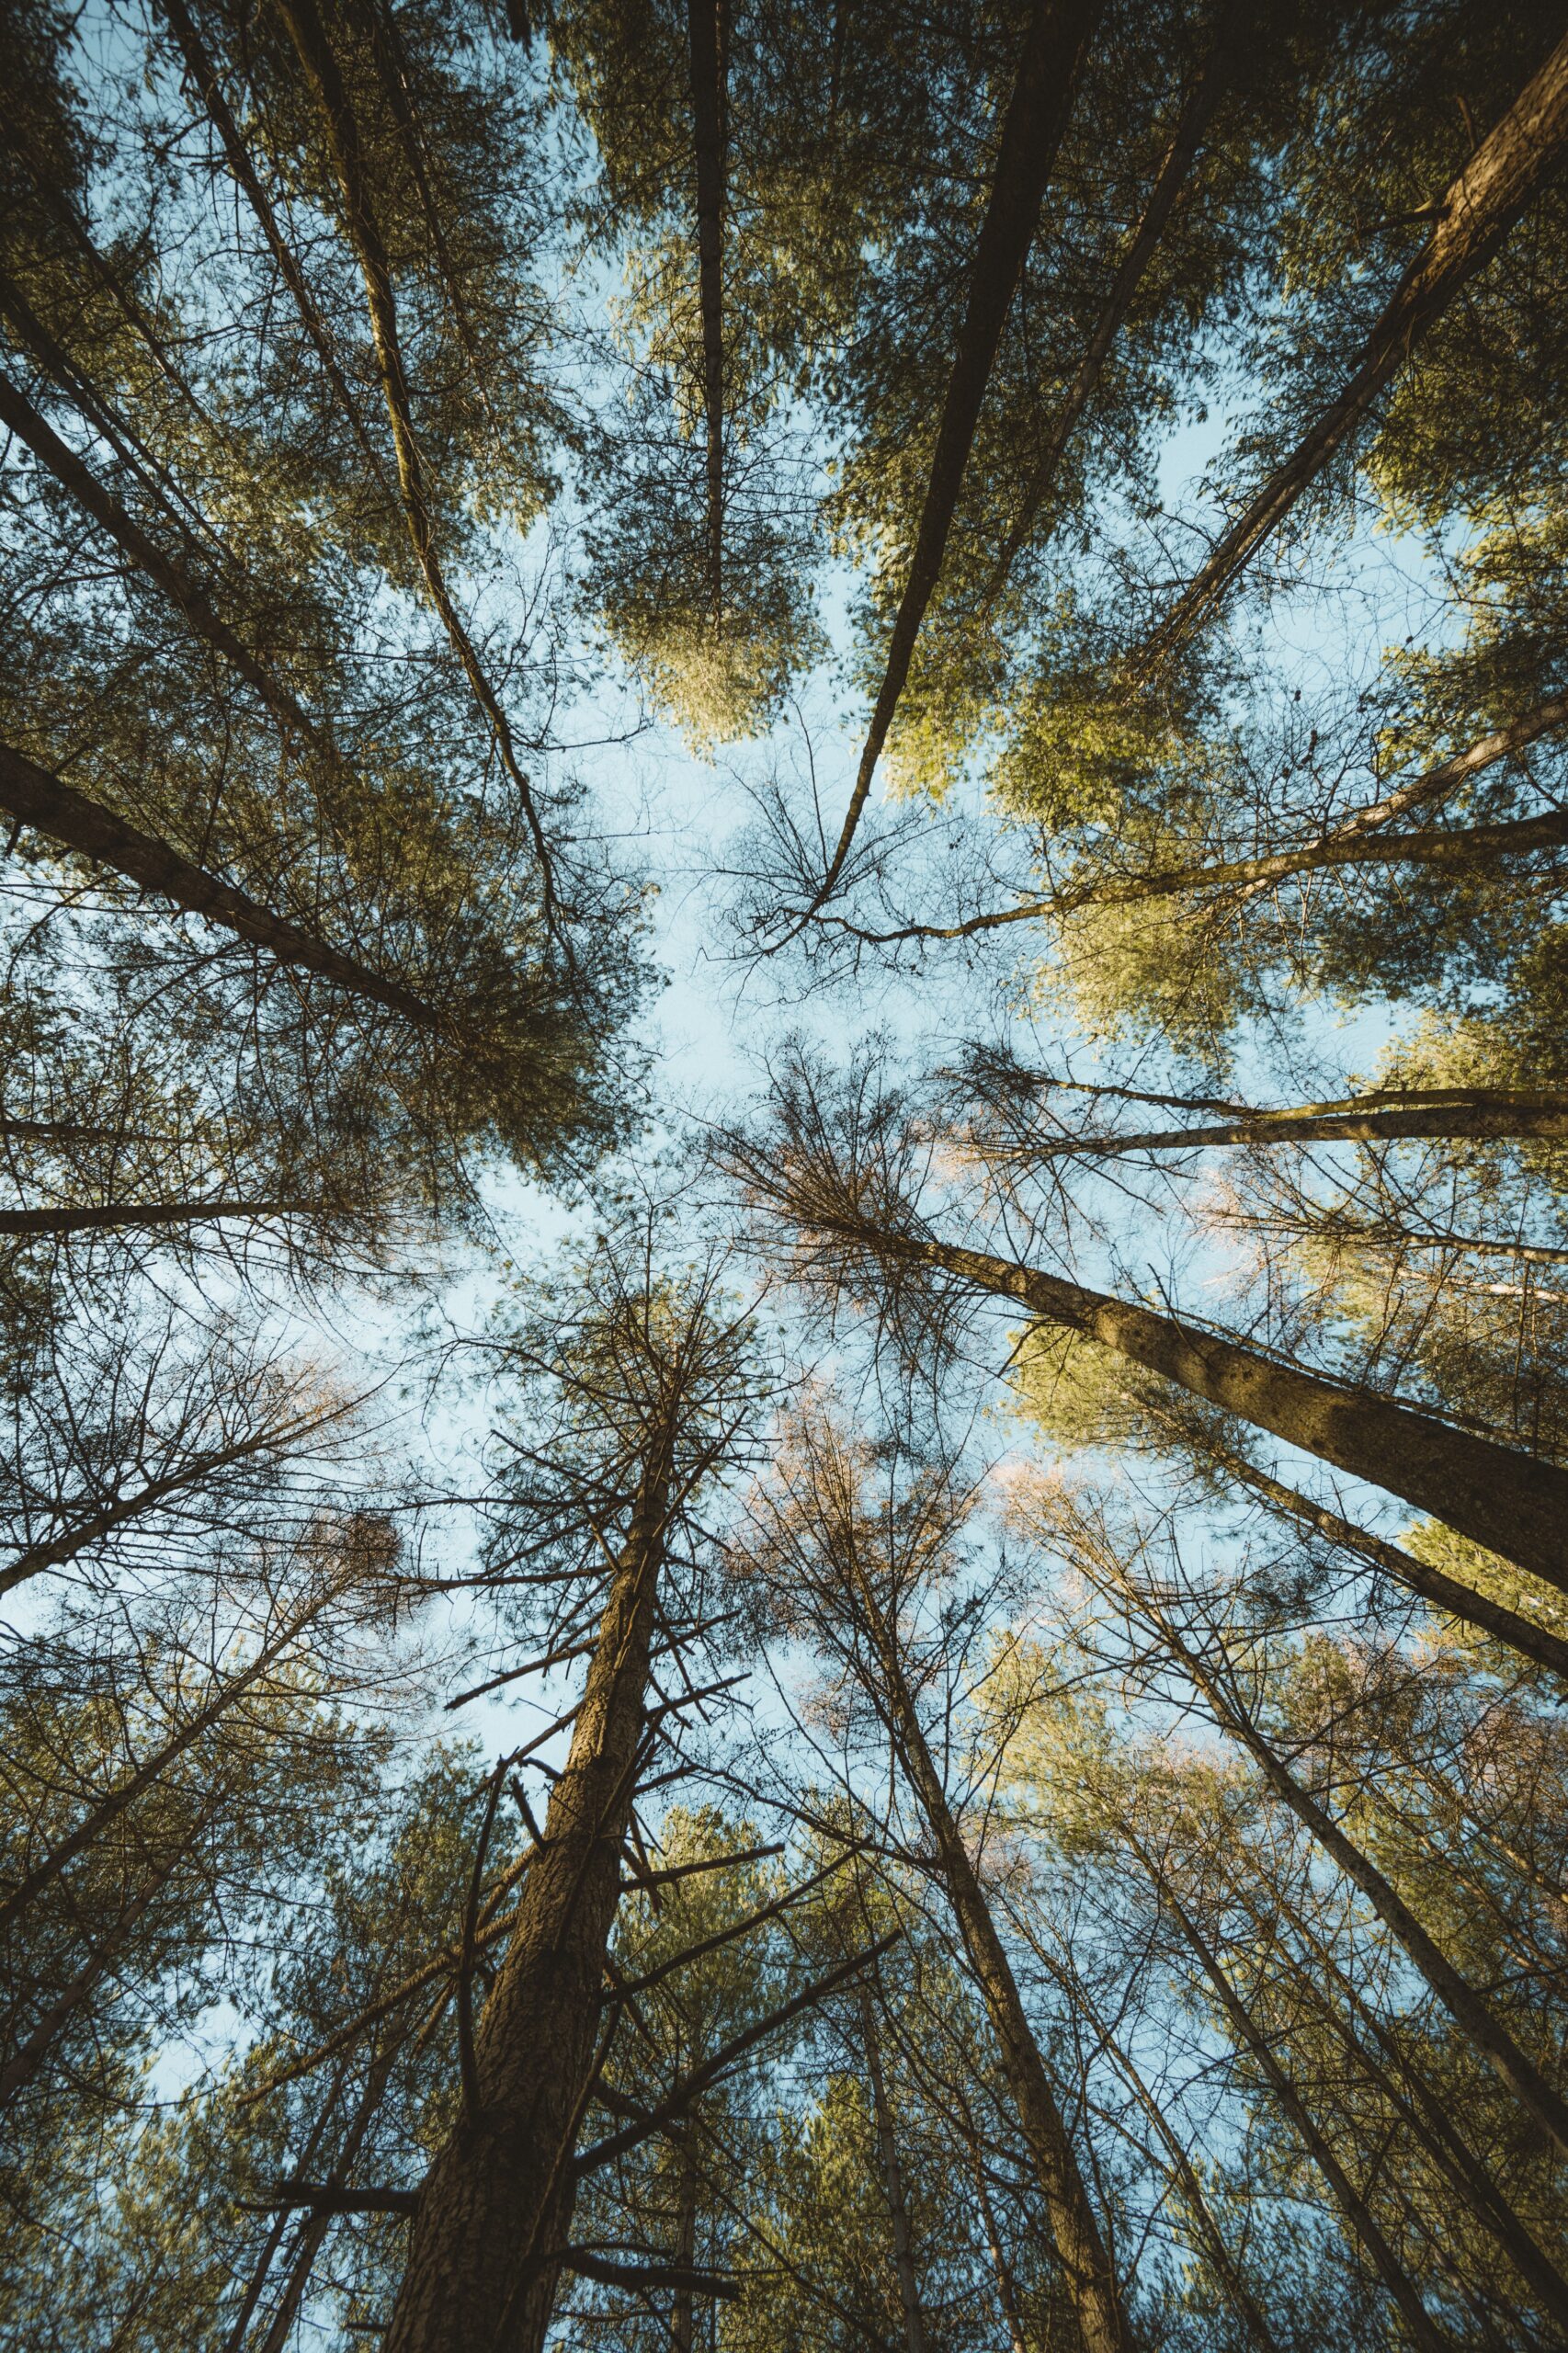 Trees stretching towards the sky, highlighting their role in addressing climate change